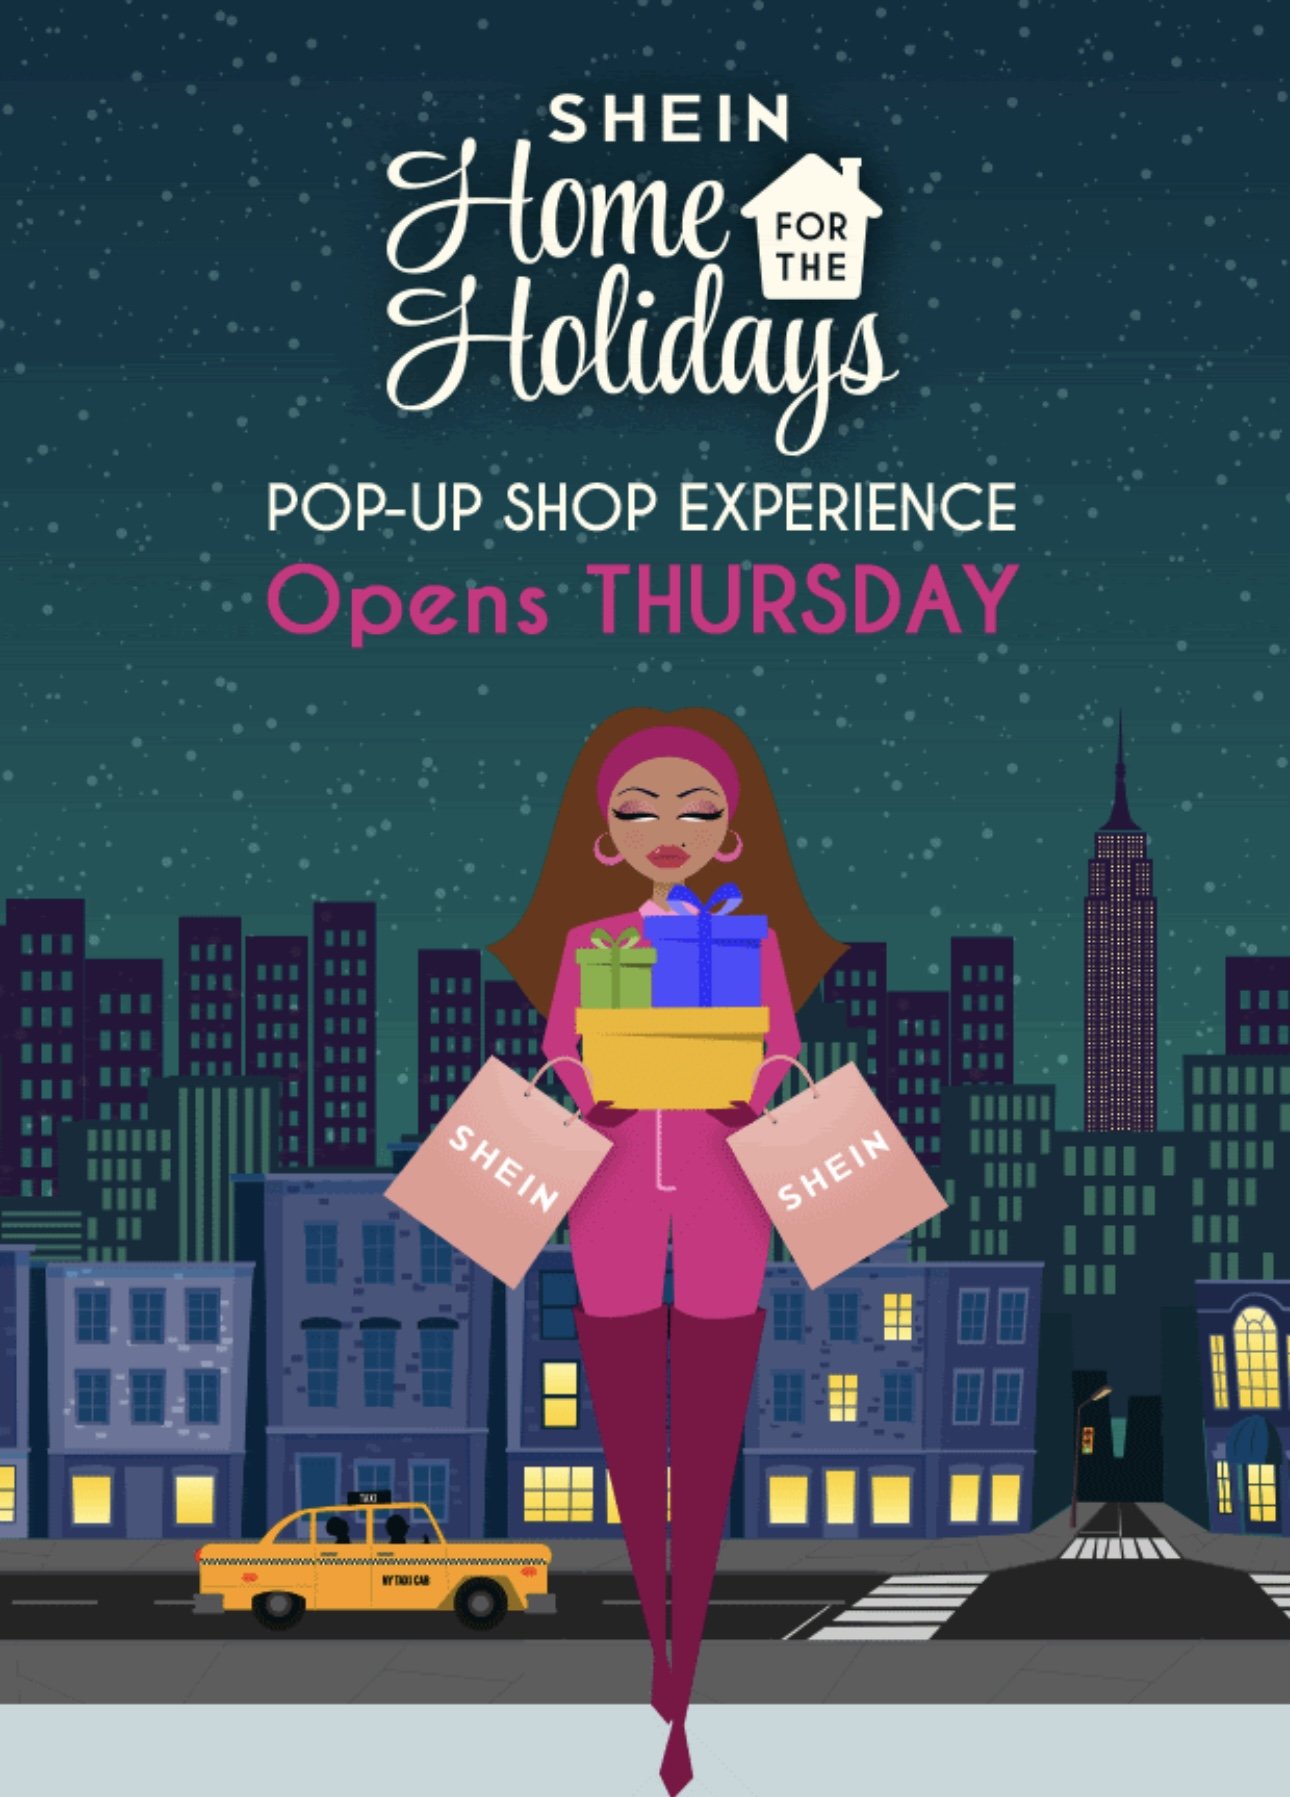 SHEIN HOSTS A HOME FOR THE HOLIDAYS IMMERSIVE POP-UP EXPERIENCE FOR  CUSTOMERS IN TIMES SQUARE